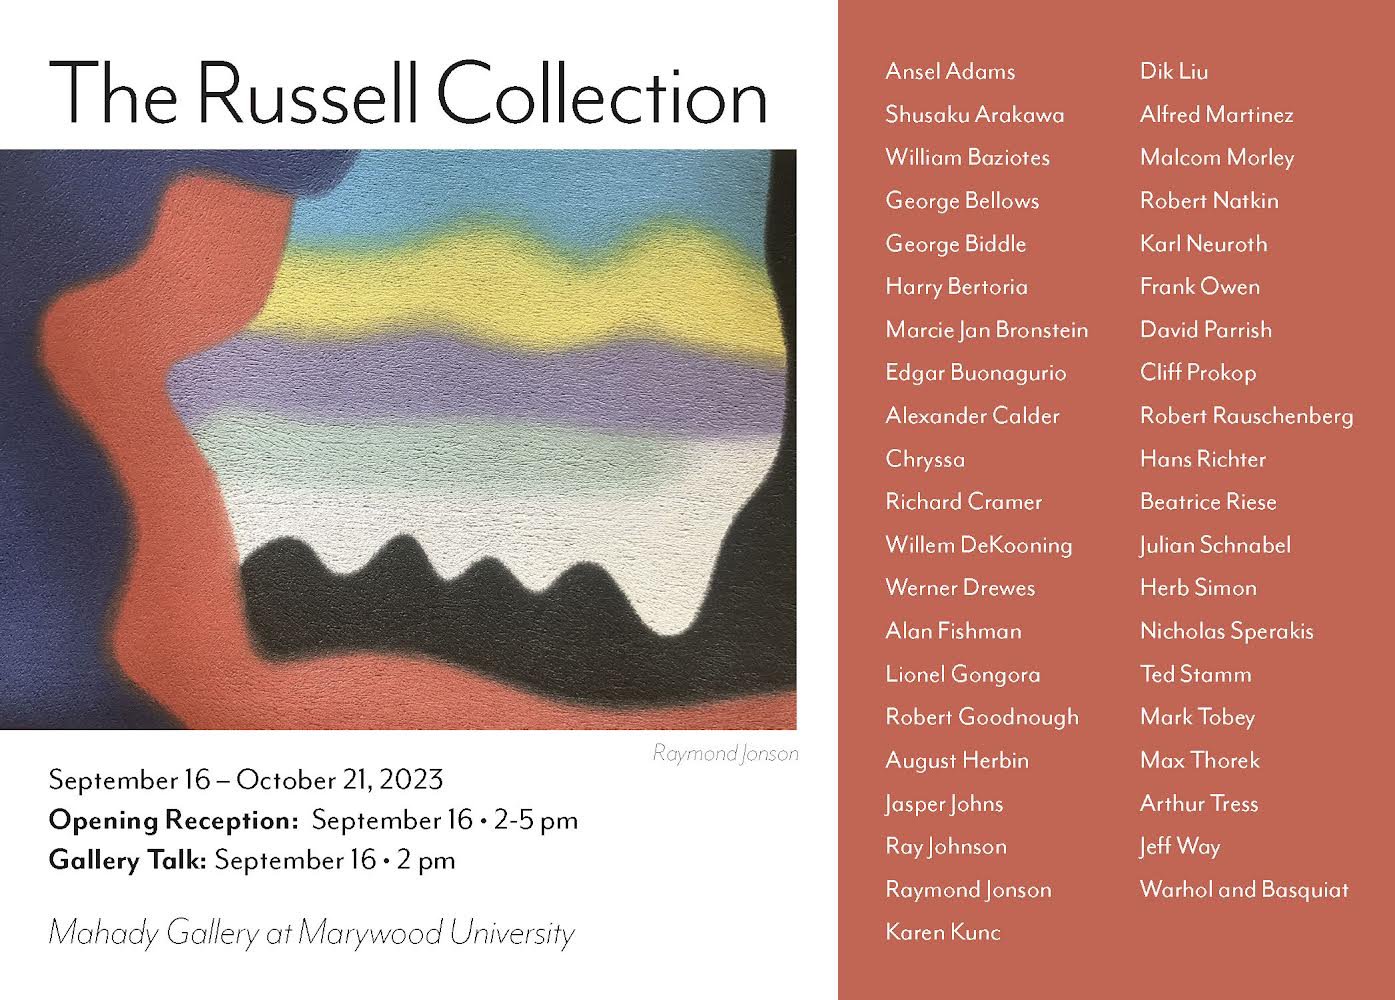 Calling card for The Russel Collection with artwork from Raymond Jonson, and information about the exhibit's showing.